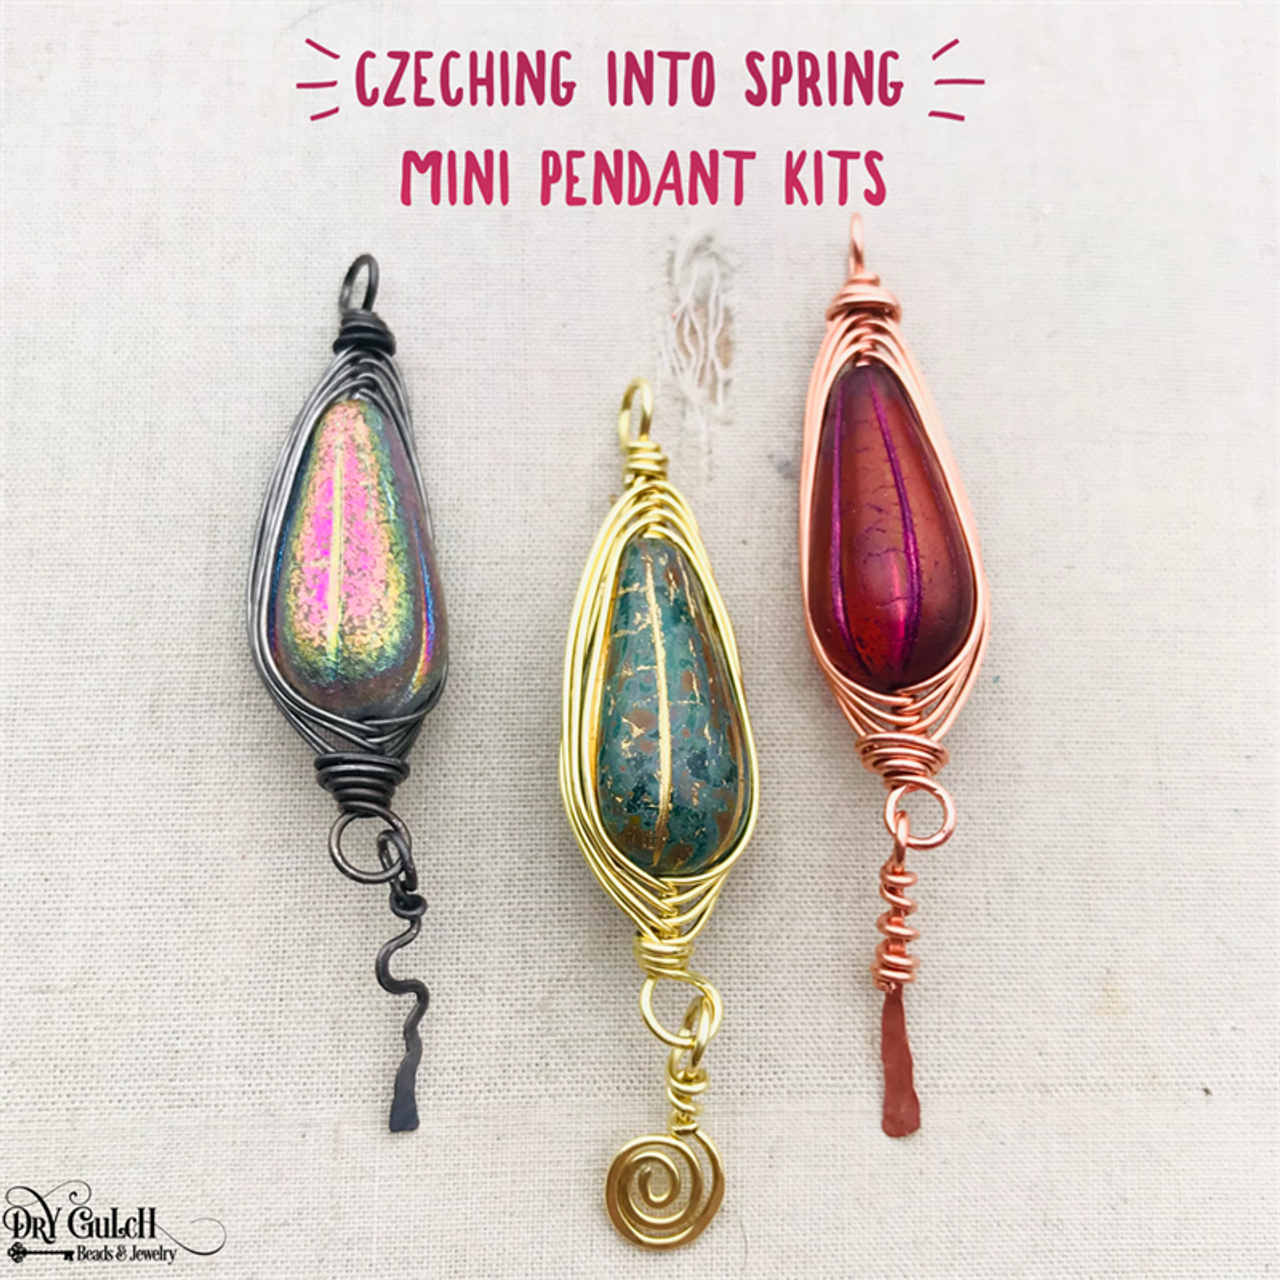 Czeching Into Spring Pendant